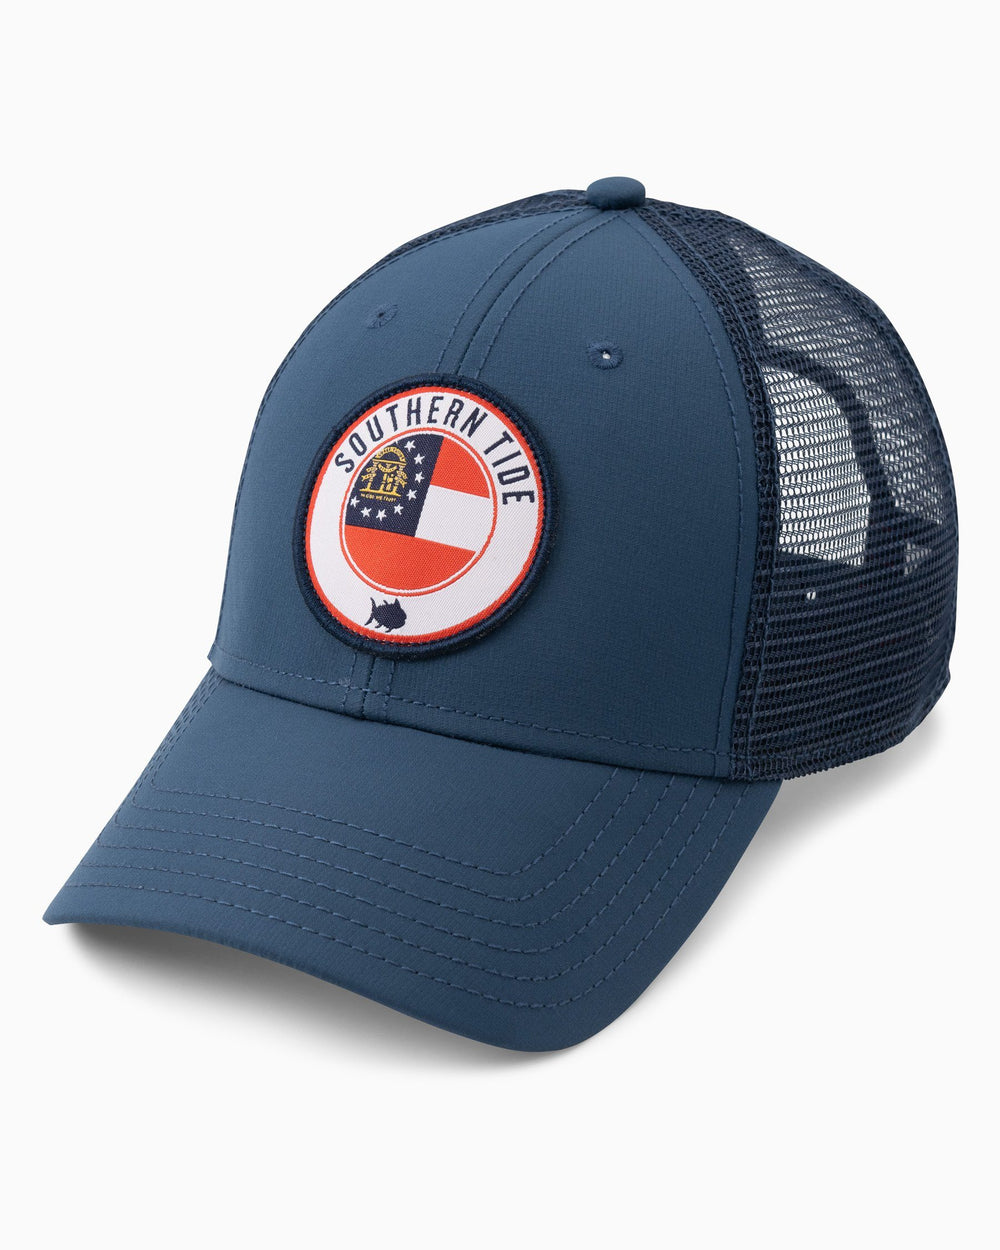 The front view of the Men's Georgia Patch Performance Trucker Hat by Southern Tide - Seven Seas Blue